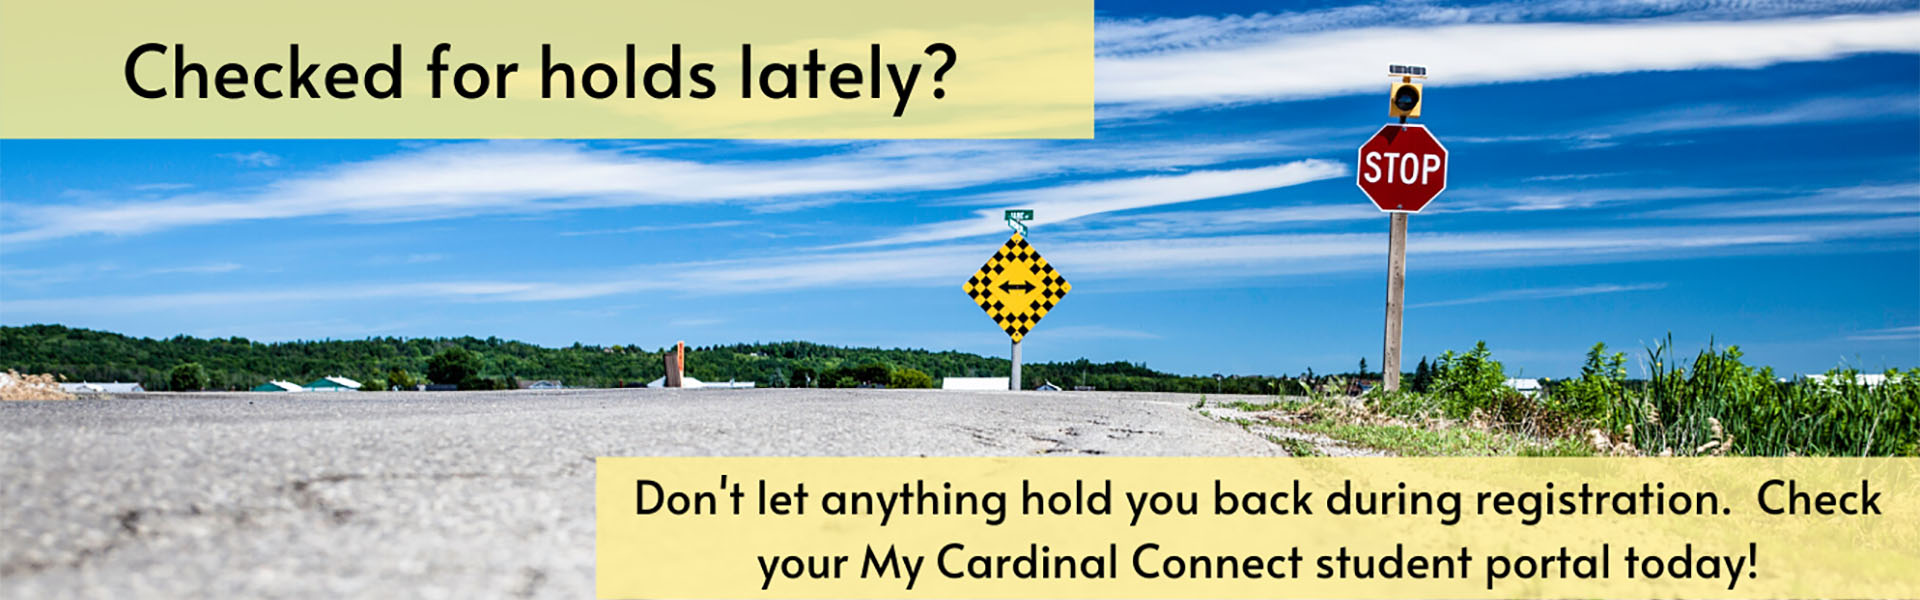 Checked for Holds Lately? Don't let anything hold you back during registration. Check your MyCardinalConnect student portal today!